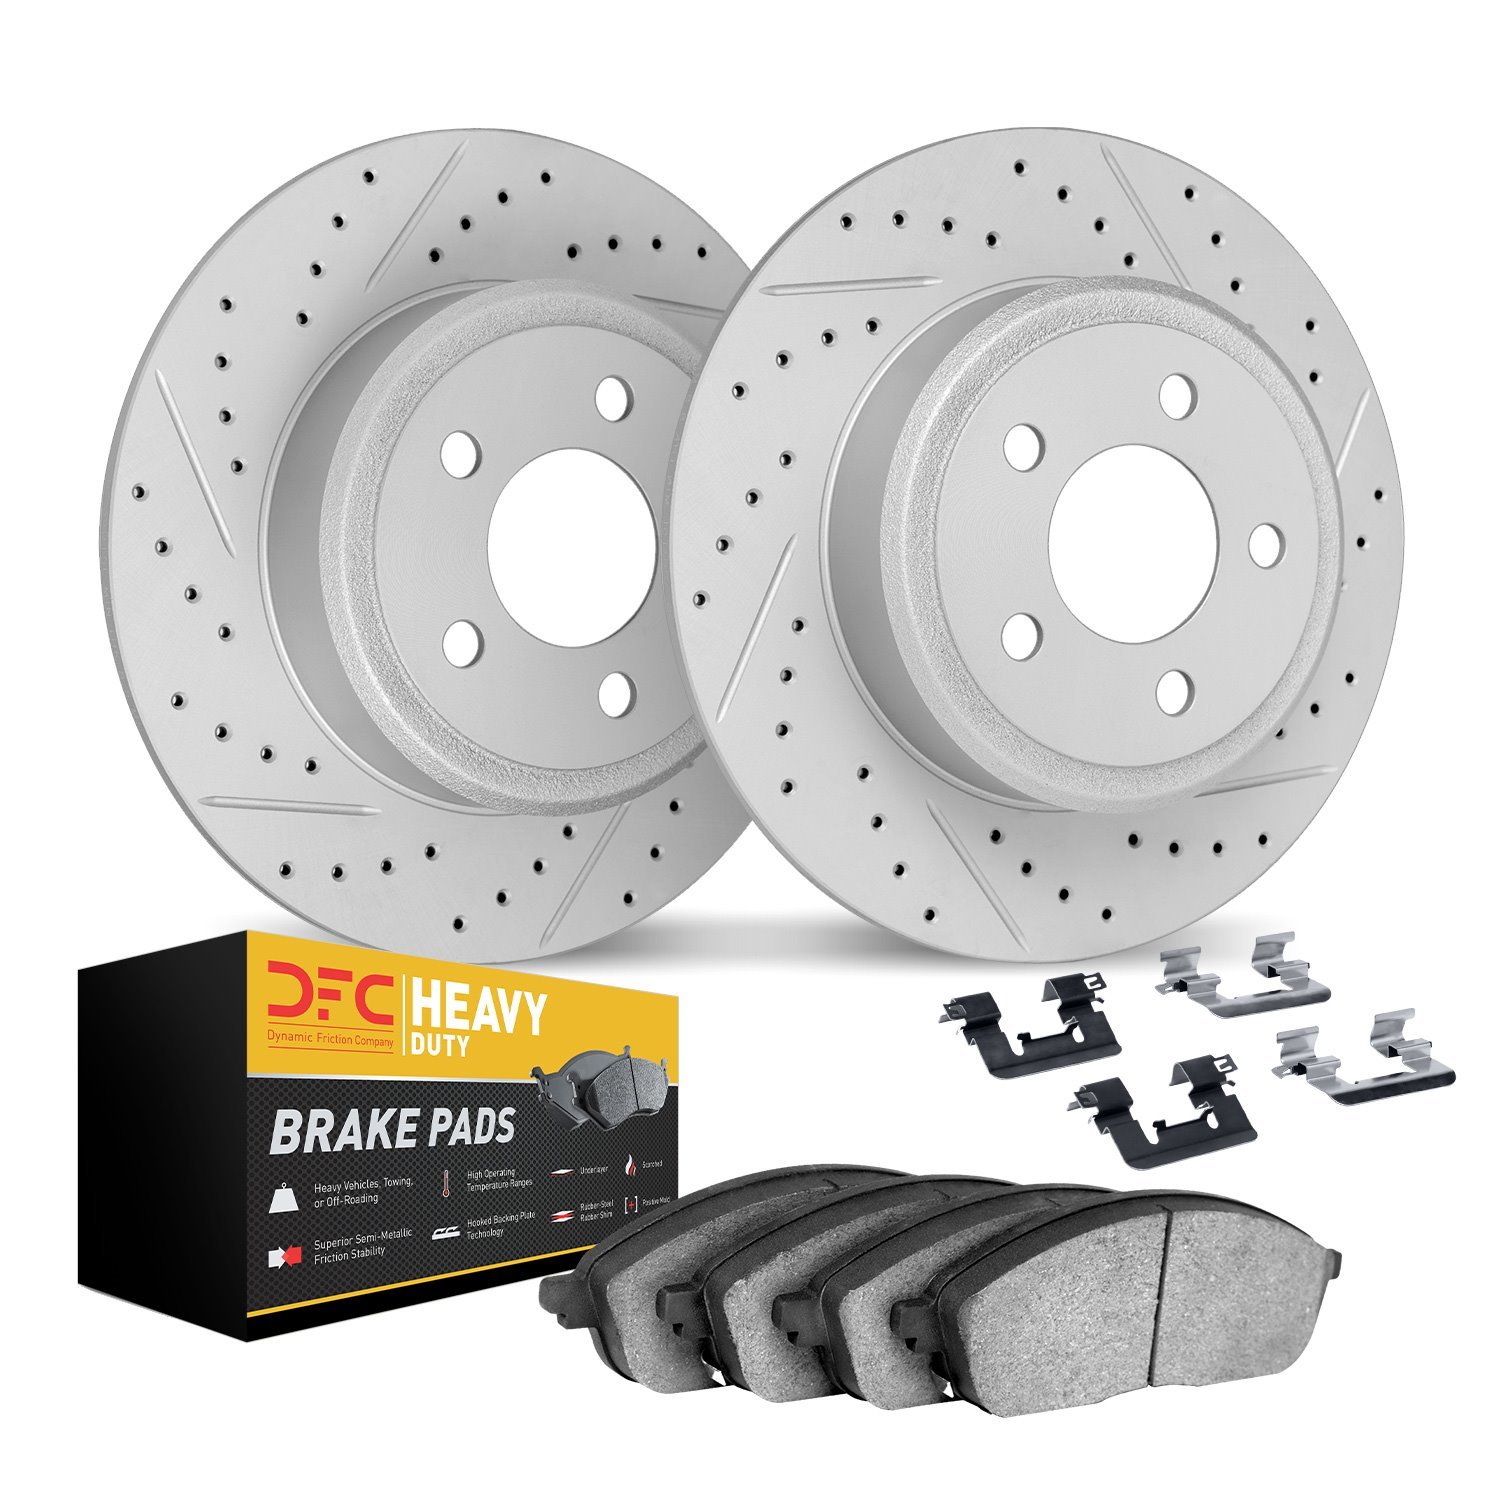 2212-99192 Geoperformance Drilled/Slotted Rotors w/Heavy-Duty Pads Kit & Hardware, 2015-2019 Ford/Lincoln/Mercury/Mazda, Positio